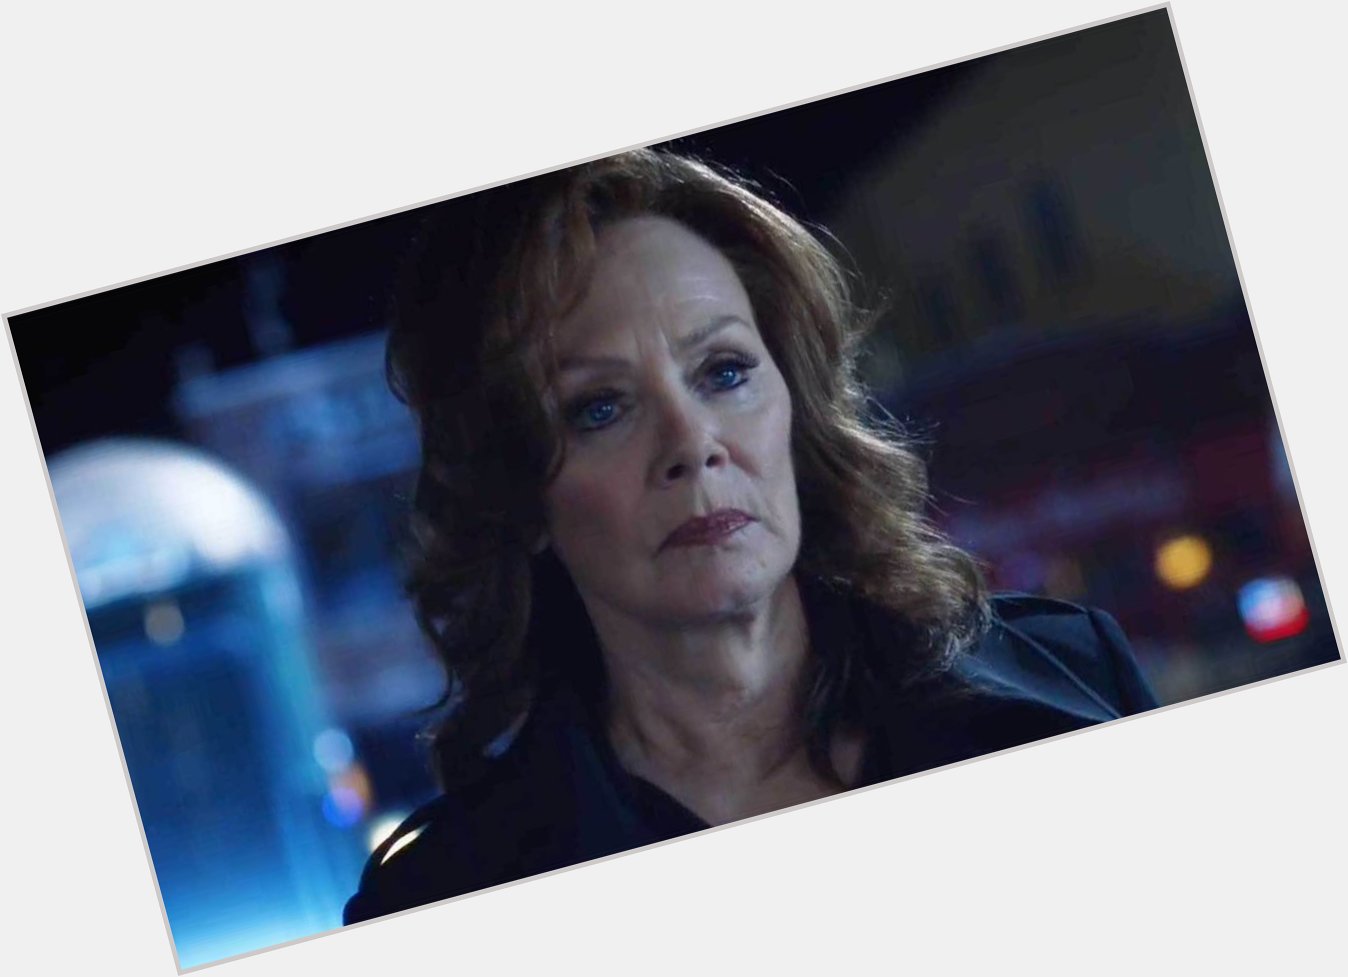 Happy birthday to Jean Smart, who plays former superhero turned FBI agent Laurie Blake in 